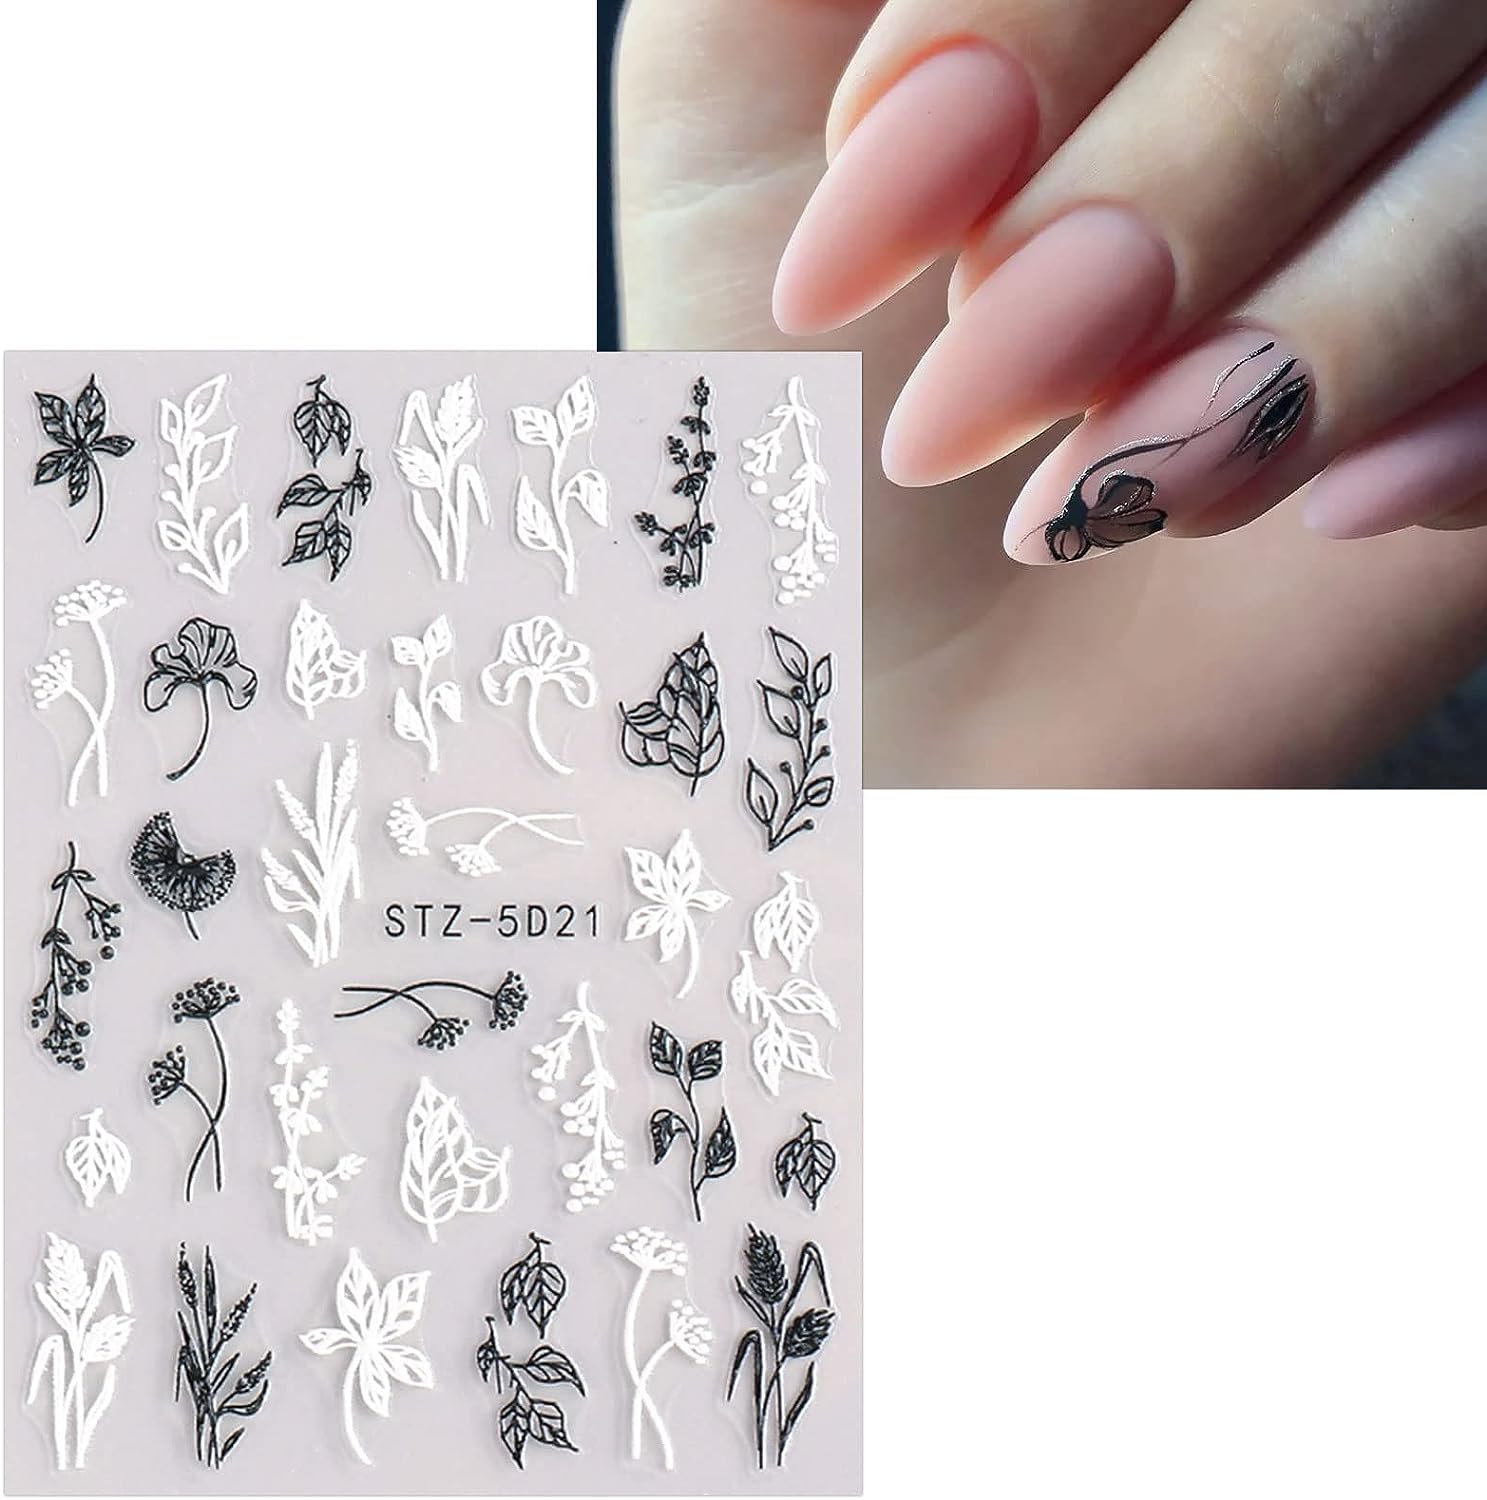 3D Embossed Flower Spring Nail Art Stickers Decals Self-Adhesive Pegatinas Uñas 5D Summer Colorful Floral Nail Supplies Nail Art Design Decoration Accessories 4 Sheets - HealthFulBeautyLife